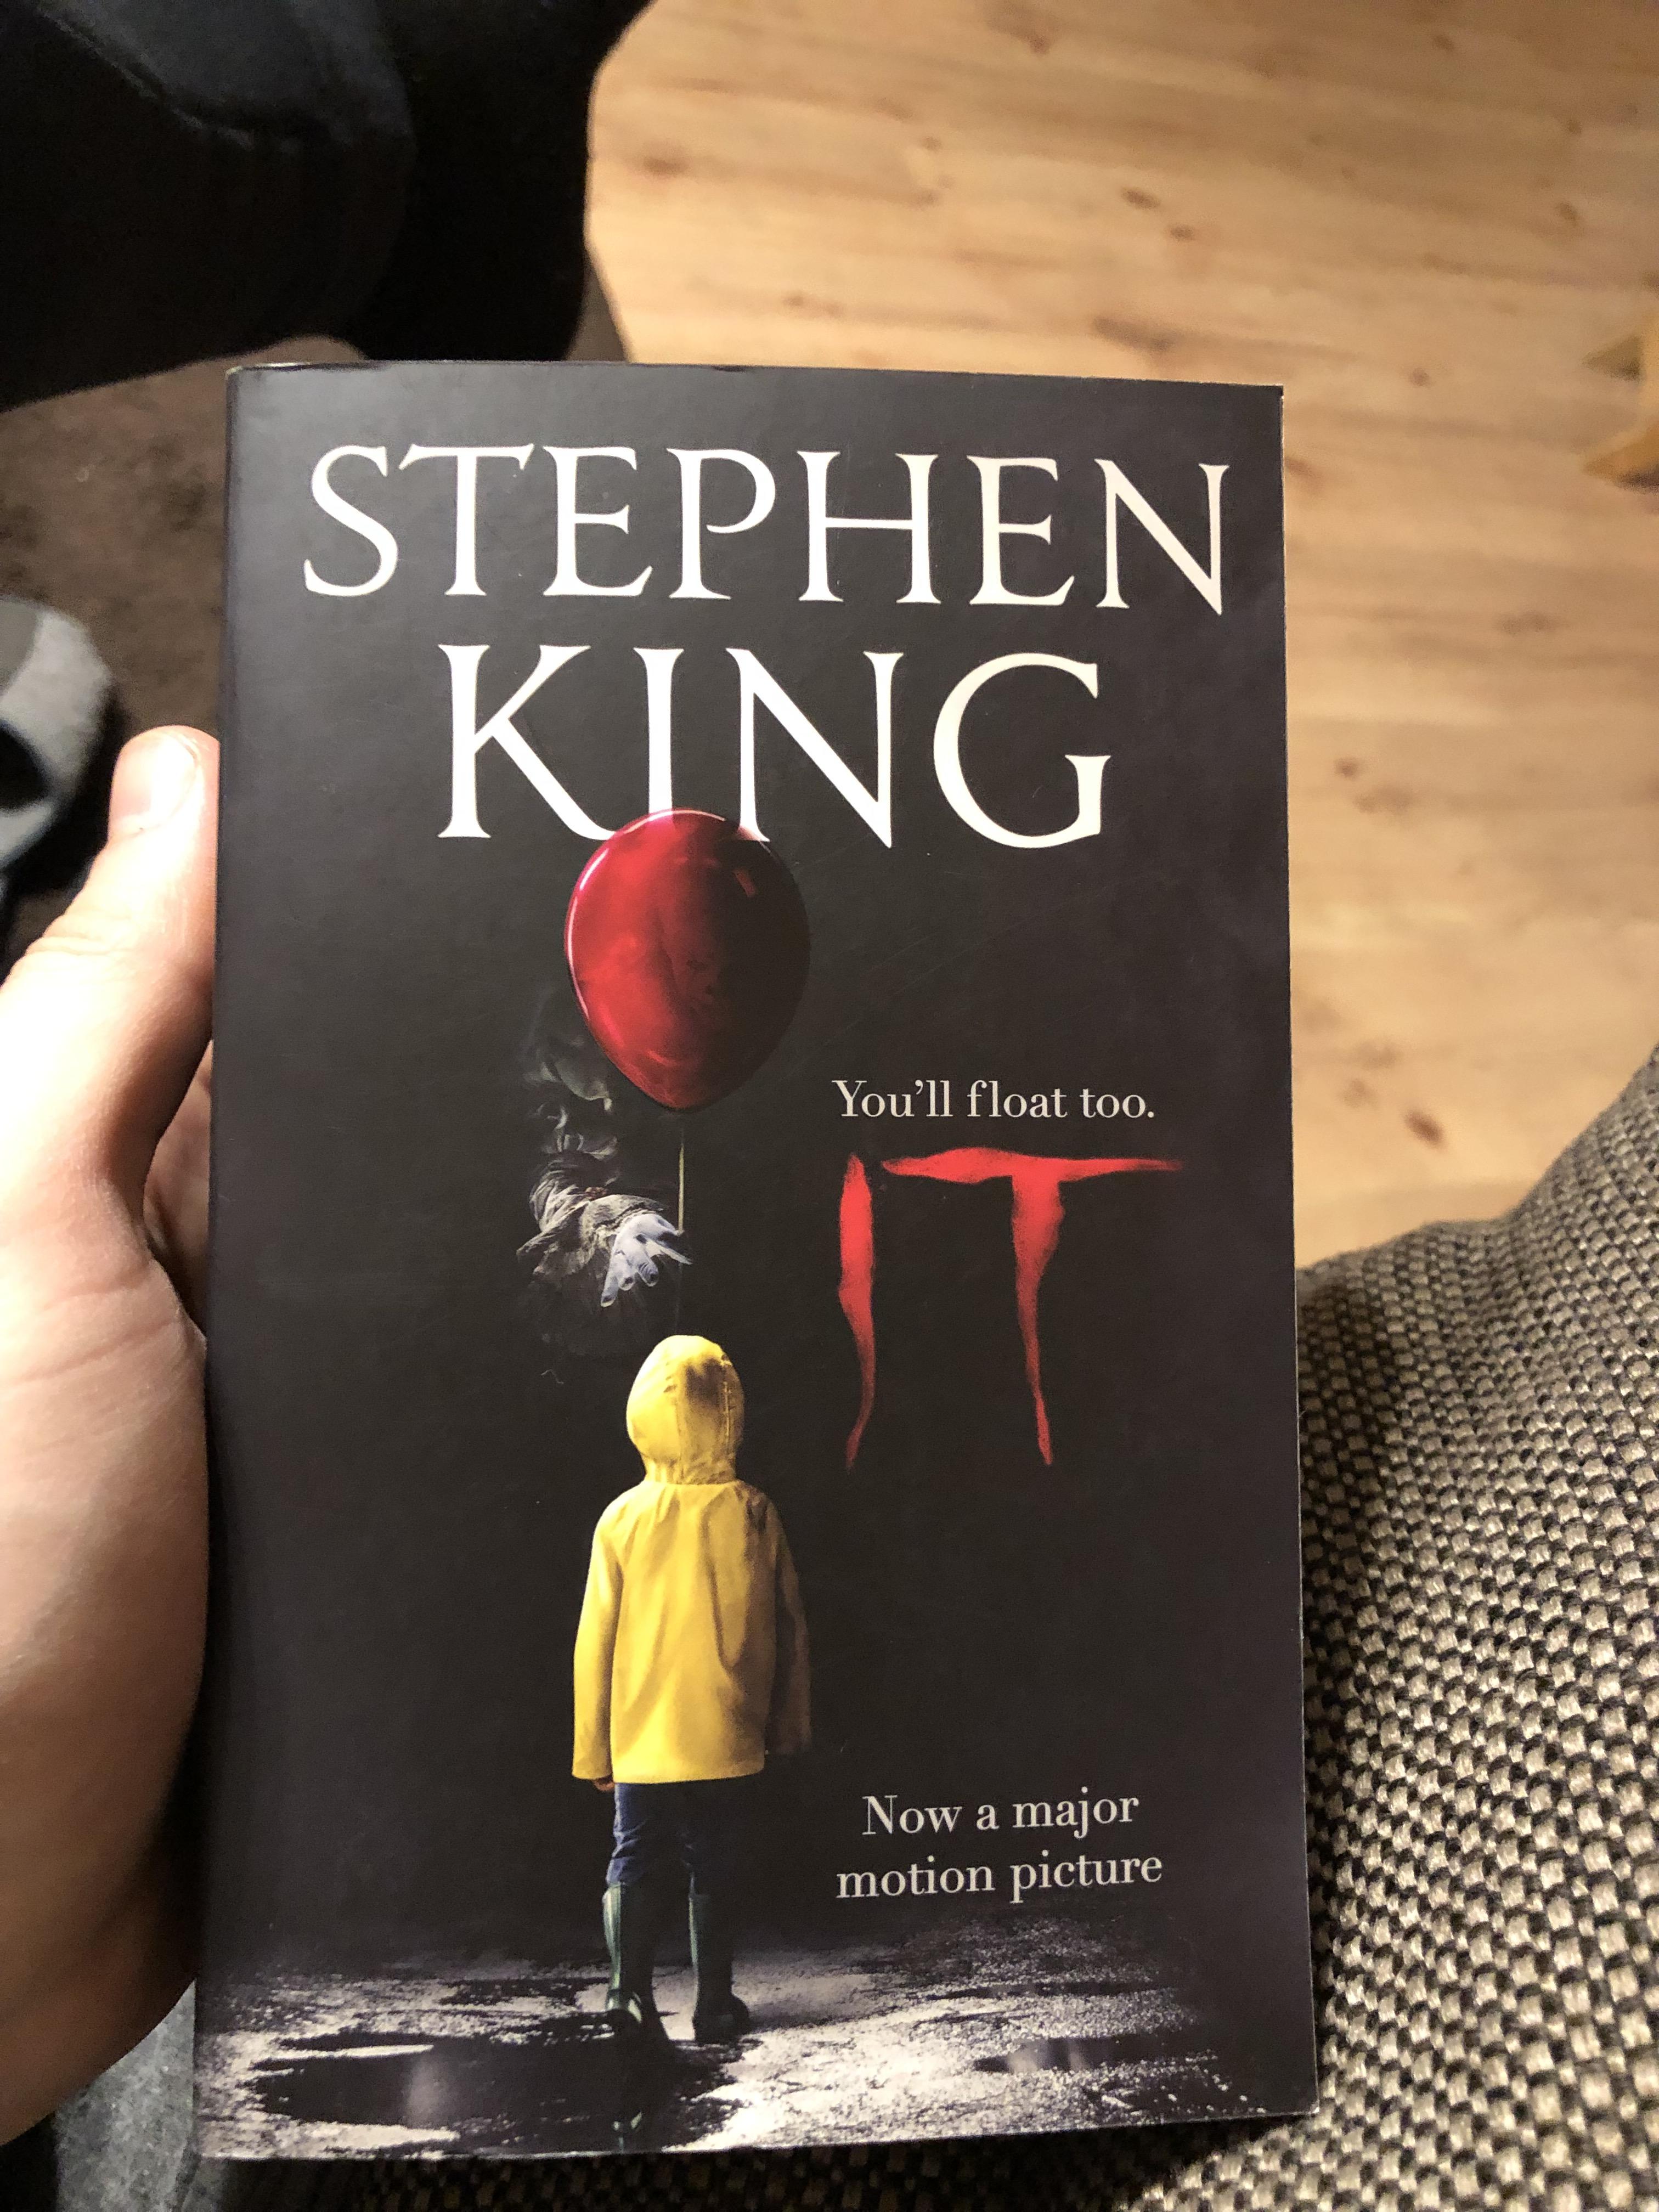 Can I read Stephen King books if I'm not a native English speaker?